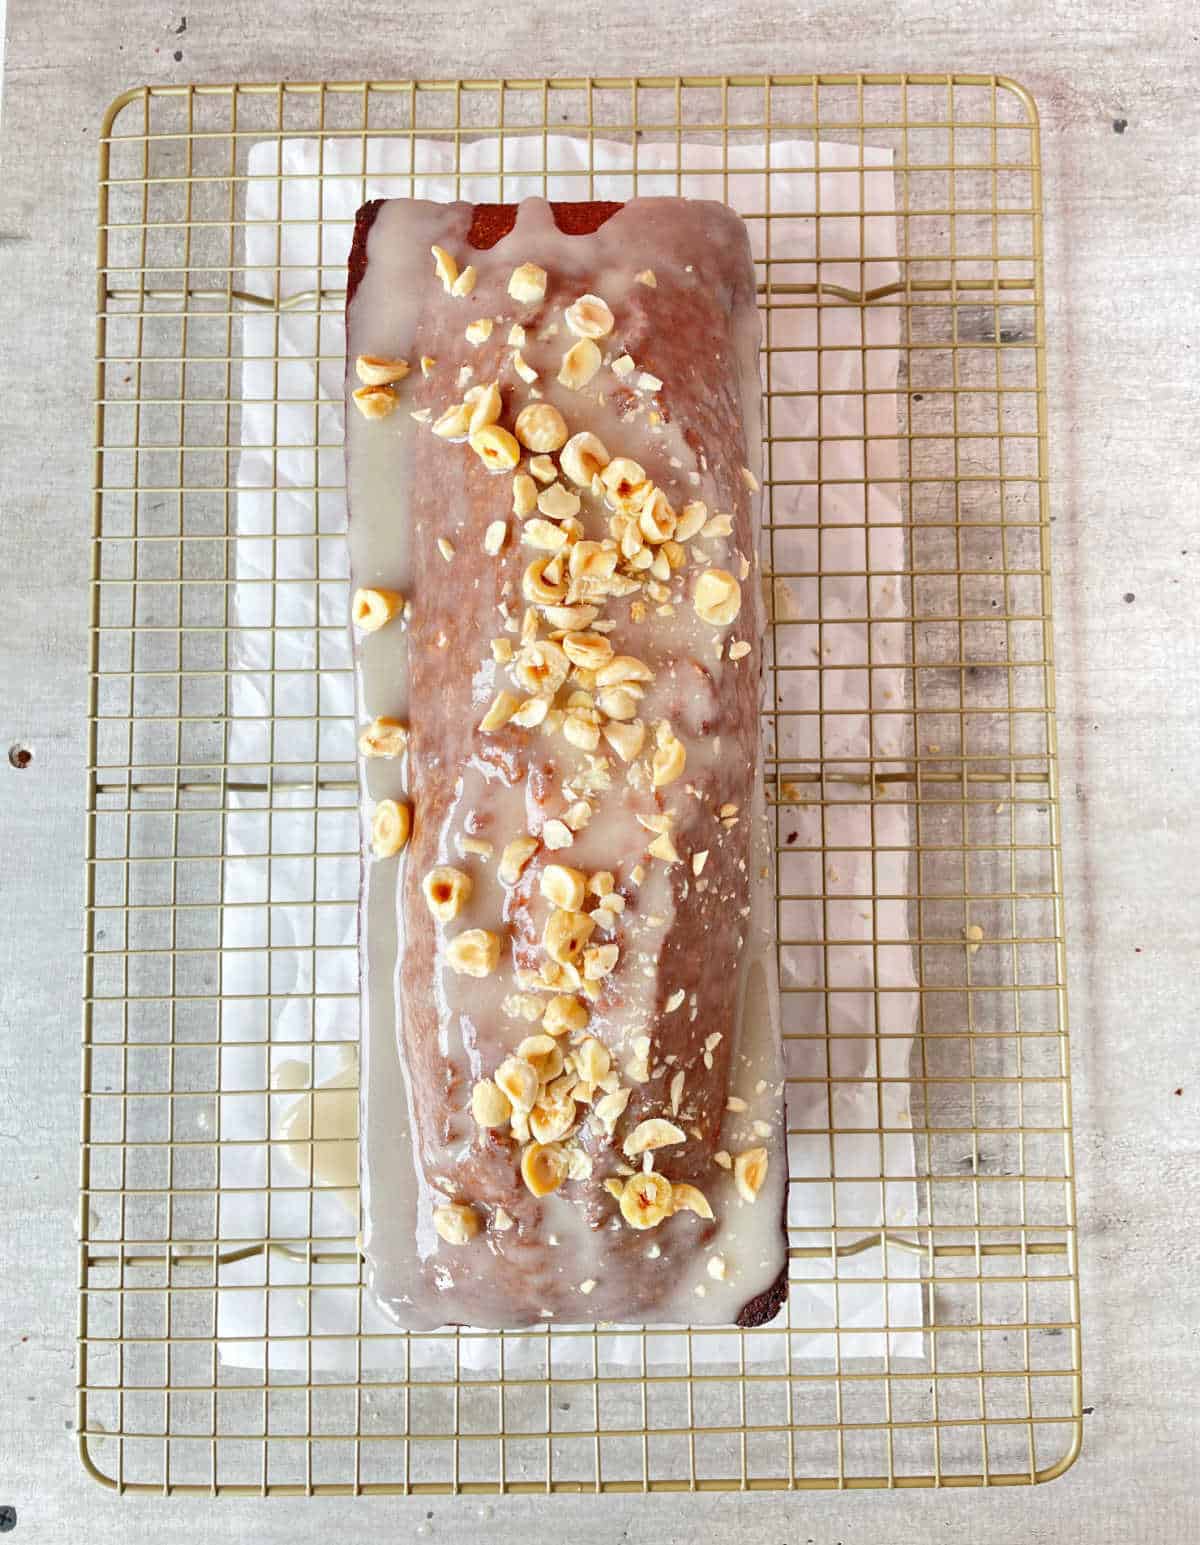 Glazed pound cake with chopped hazelnuts on a wire rack with parchment paper. Grey surface.